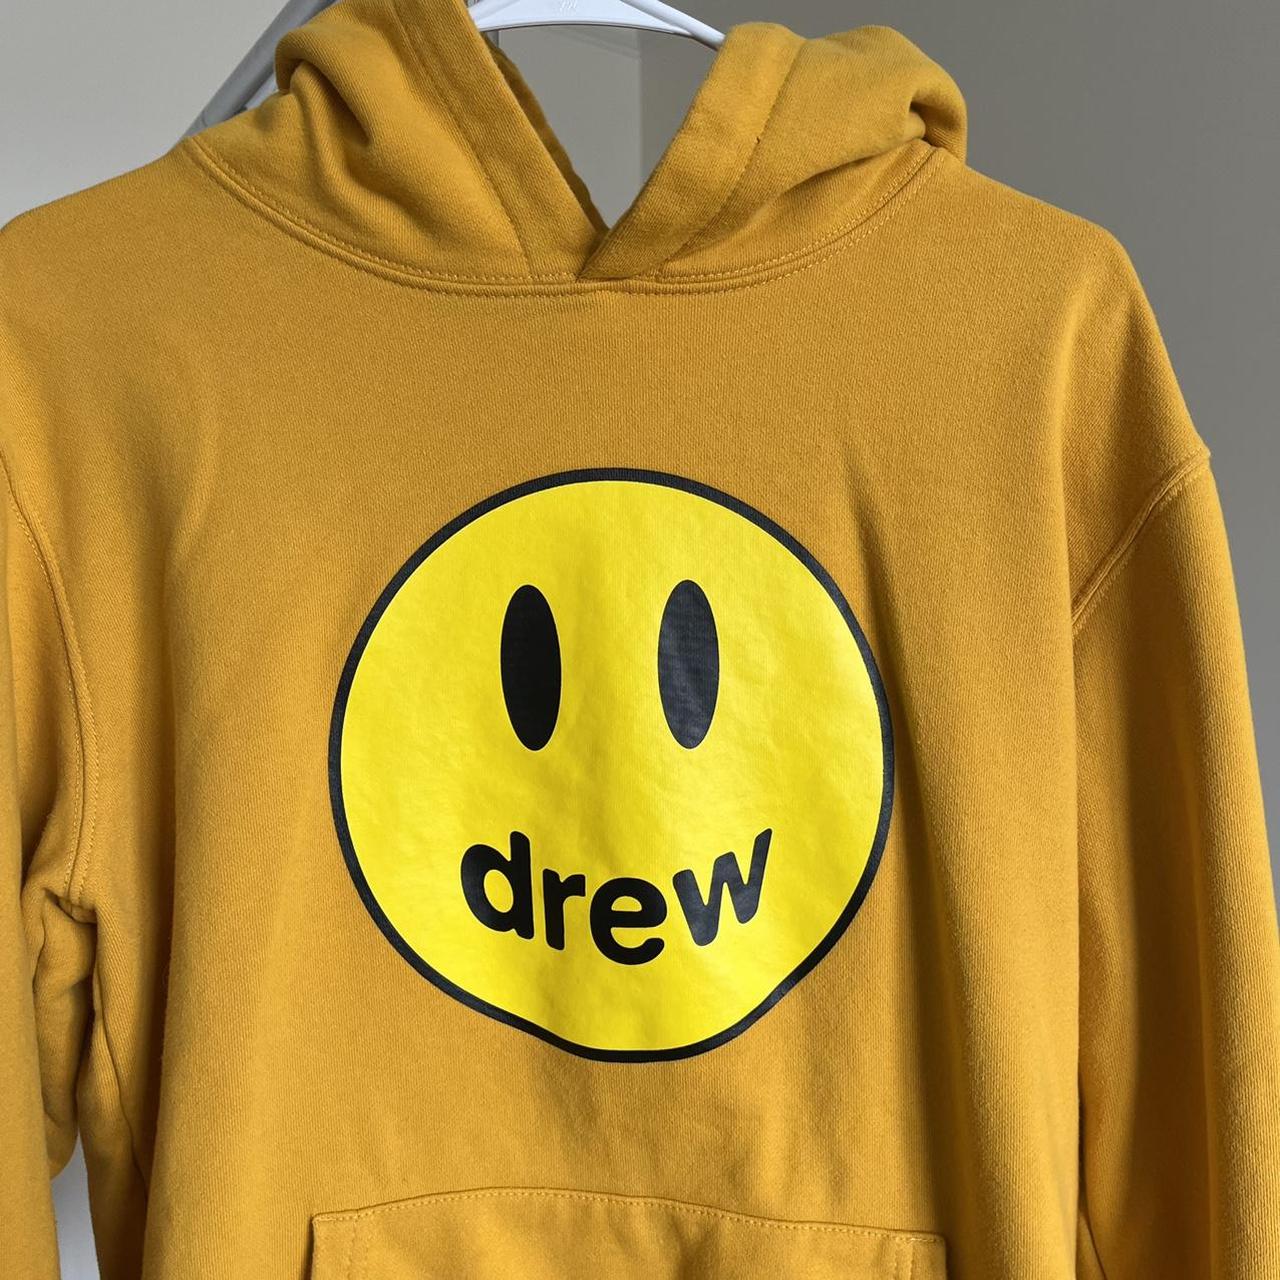 Drew House hoodie (unisex), Size L (fits like a